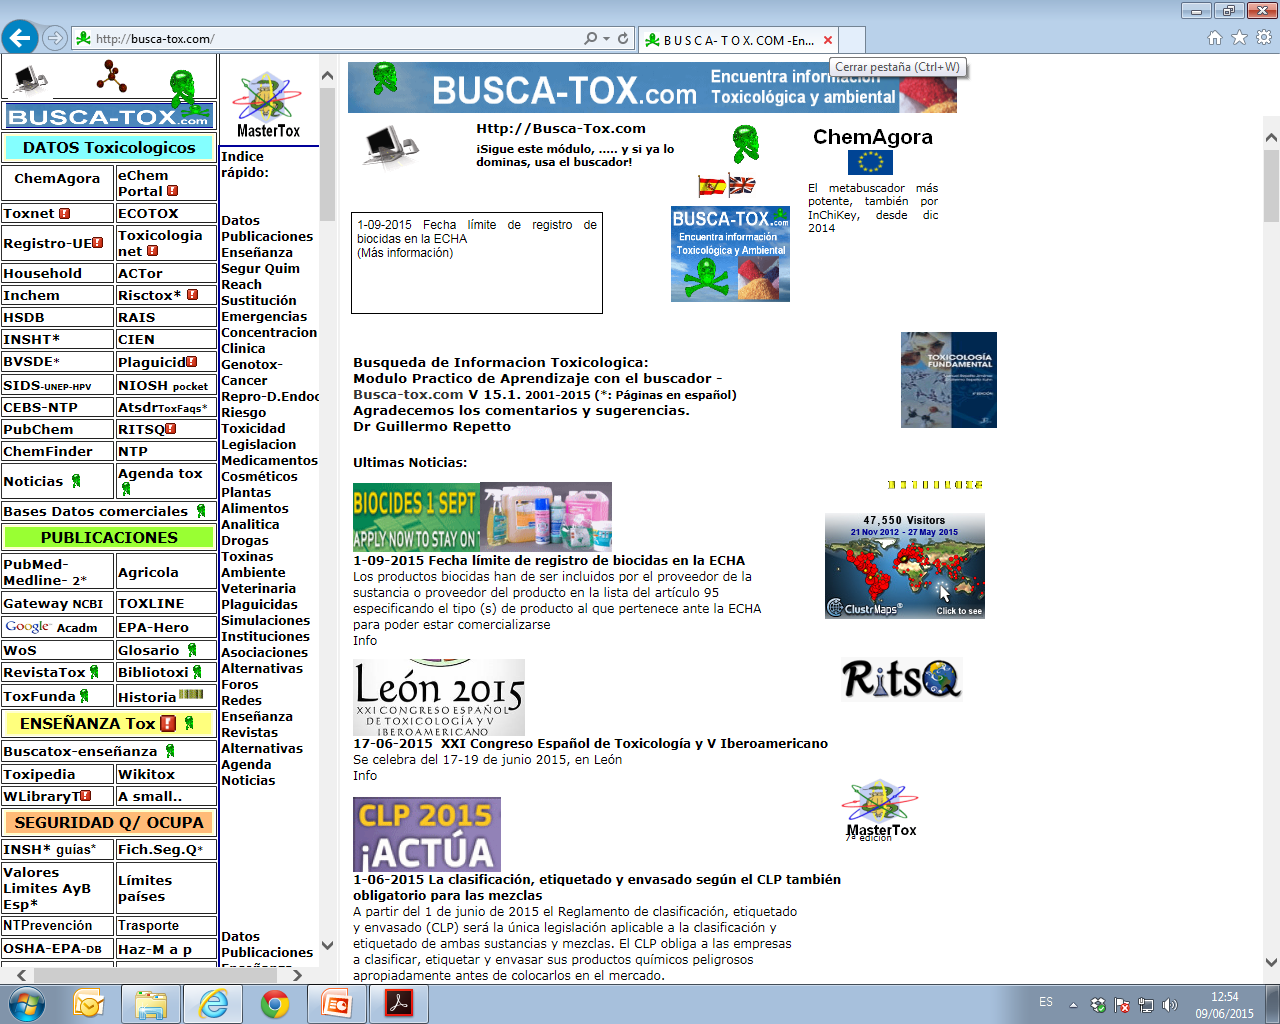 Busca-tox